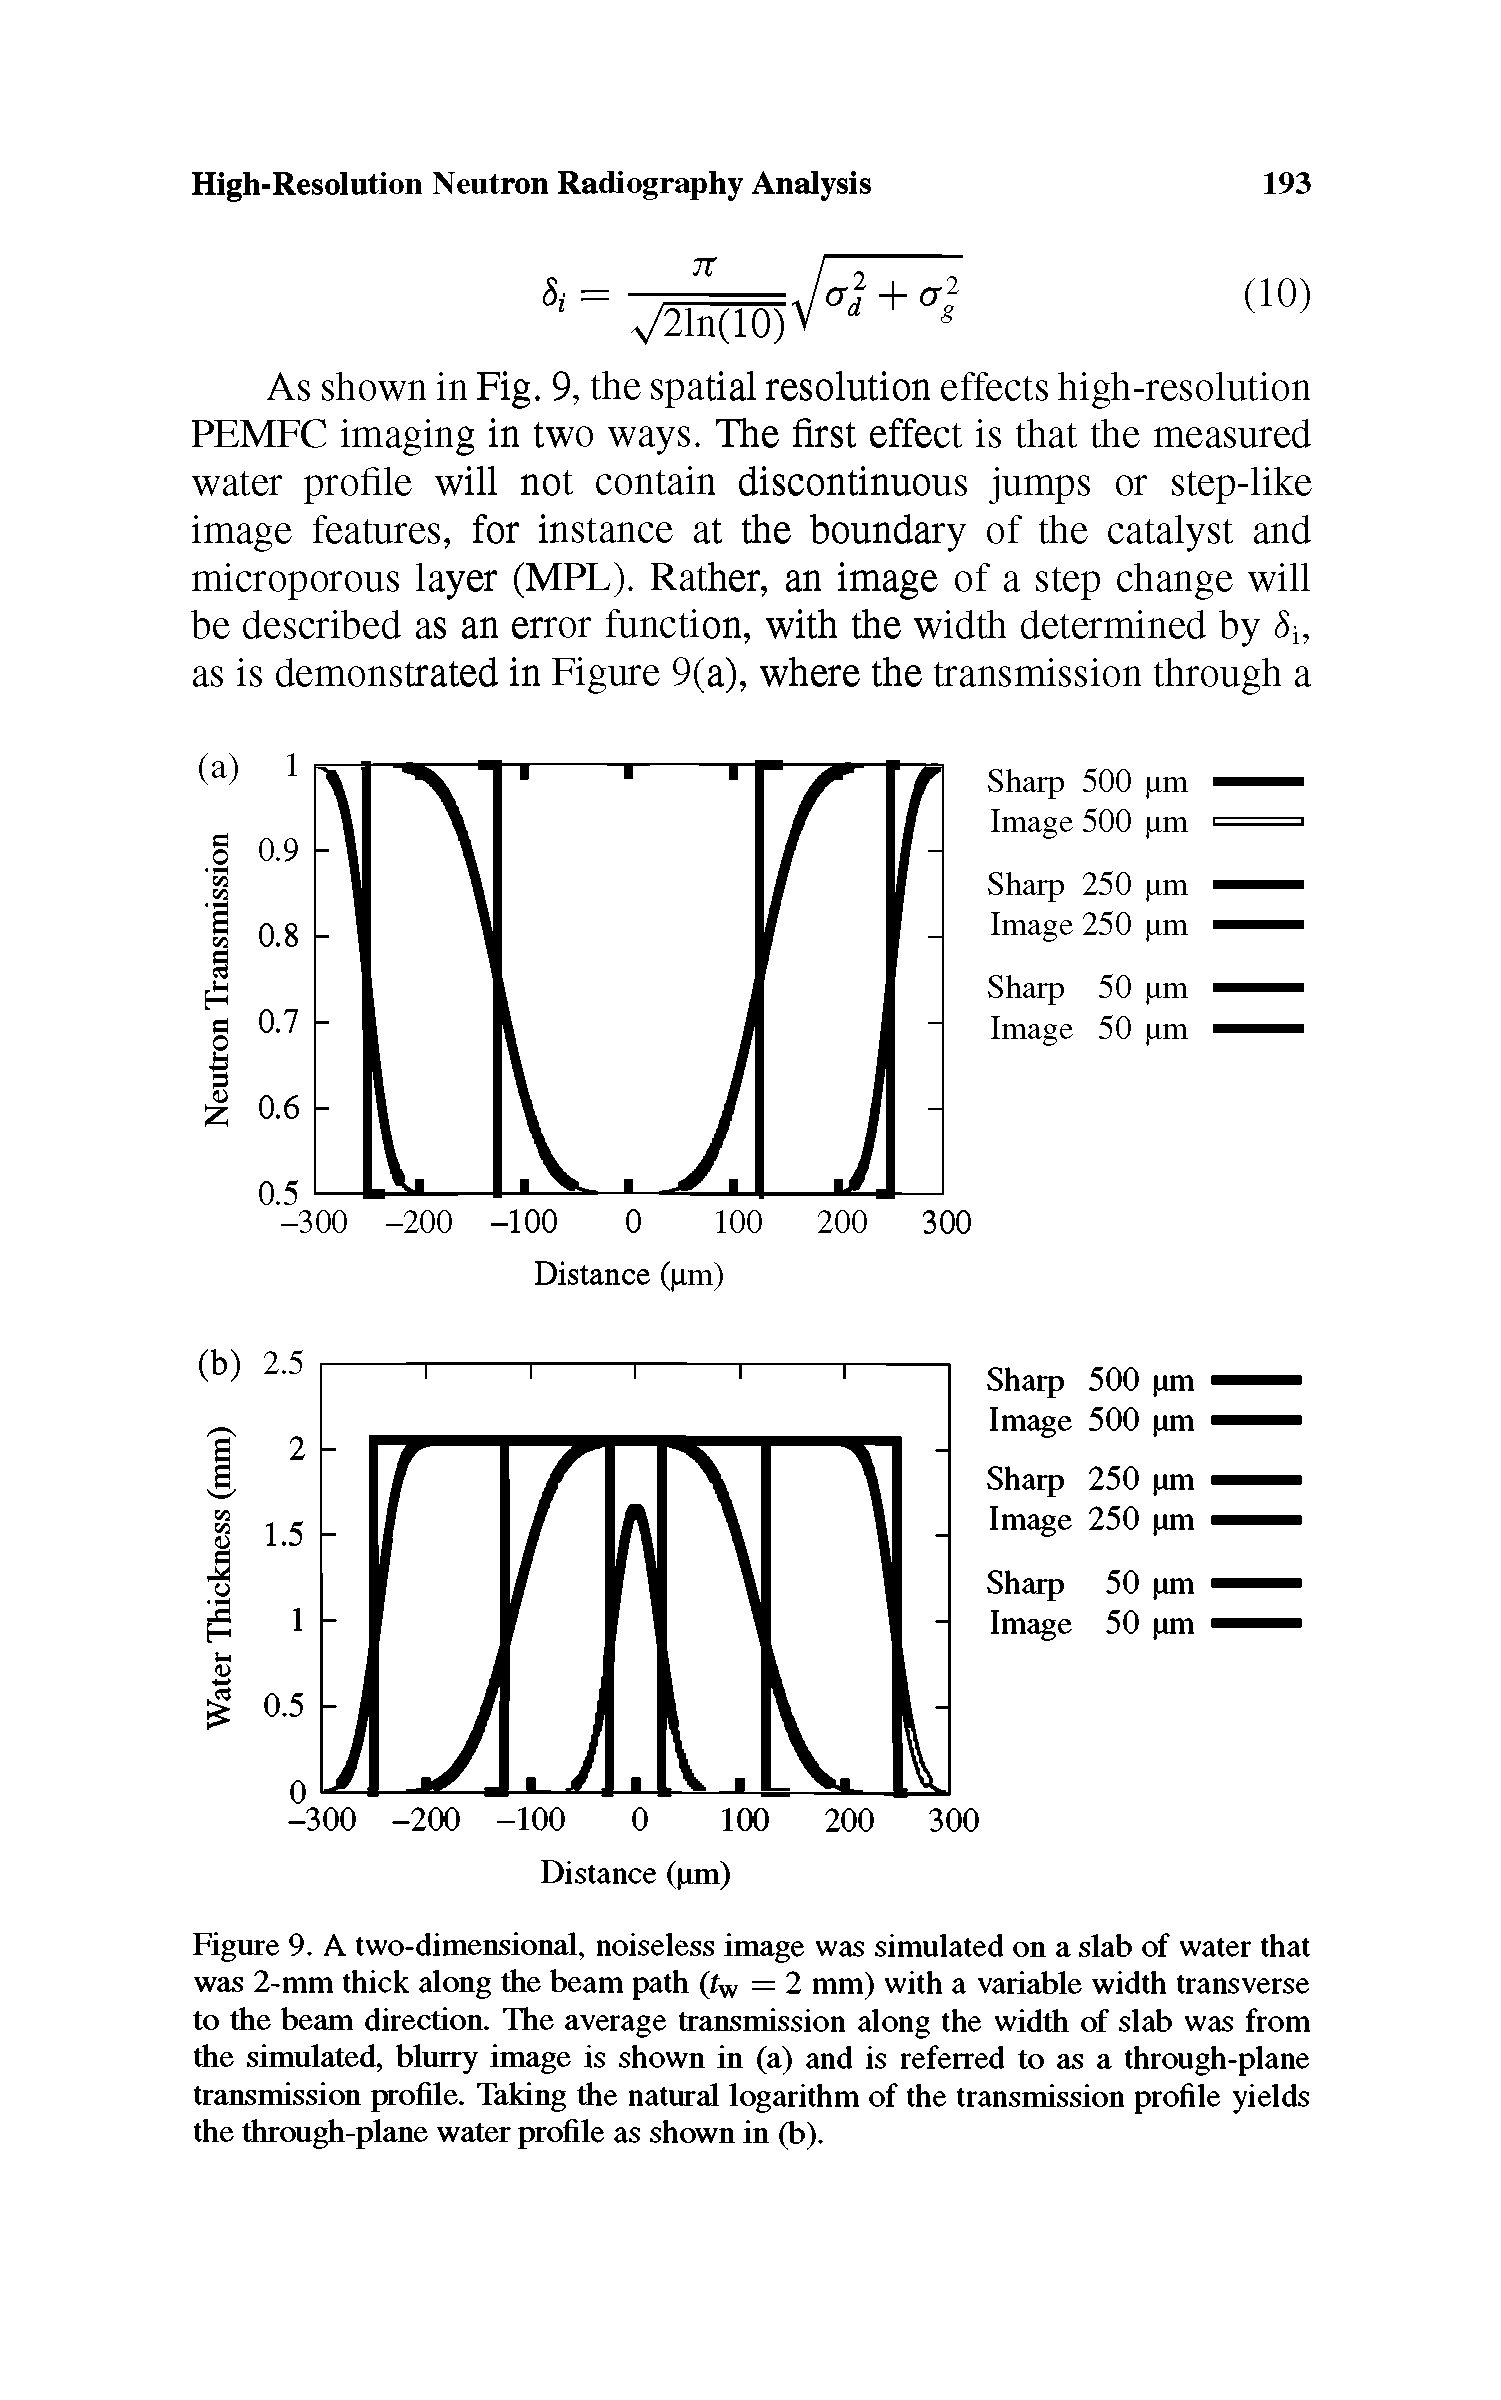 Figure 9. A two-dimensional, noiseless image was simulated on a slab of water that was 2-mm thick along the beam path (tw = 2 mm) with a variable width transverse to the beam direction. The average transmission along the width of slab was from the simulated, blurry image is shown in (a) and is referred to as a through-plane transmission profile. Taking the natural logarithm of the transmission profile yields the through-plane water profile as shown in (b).